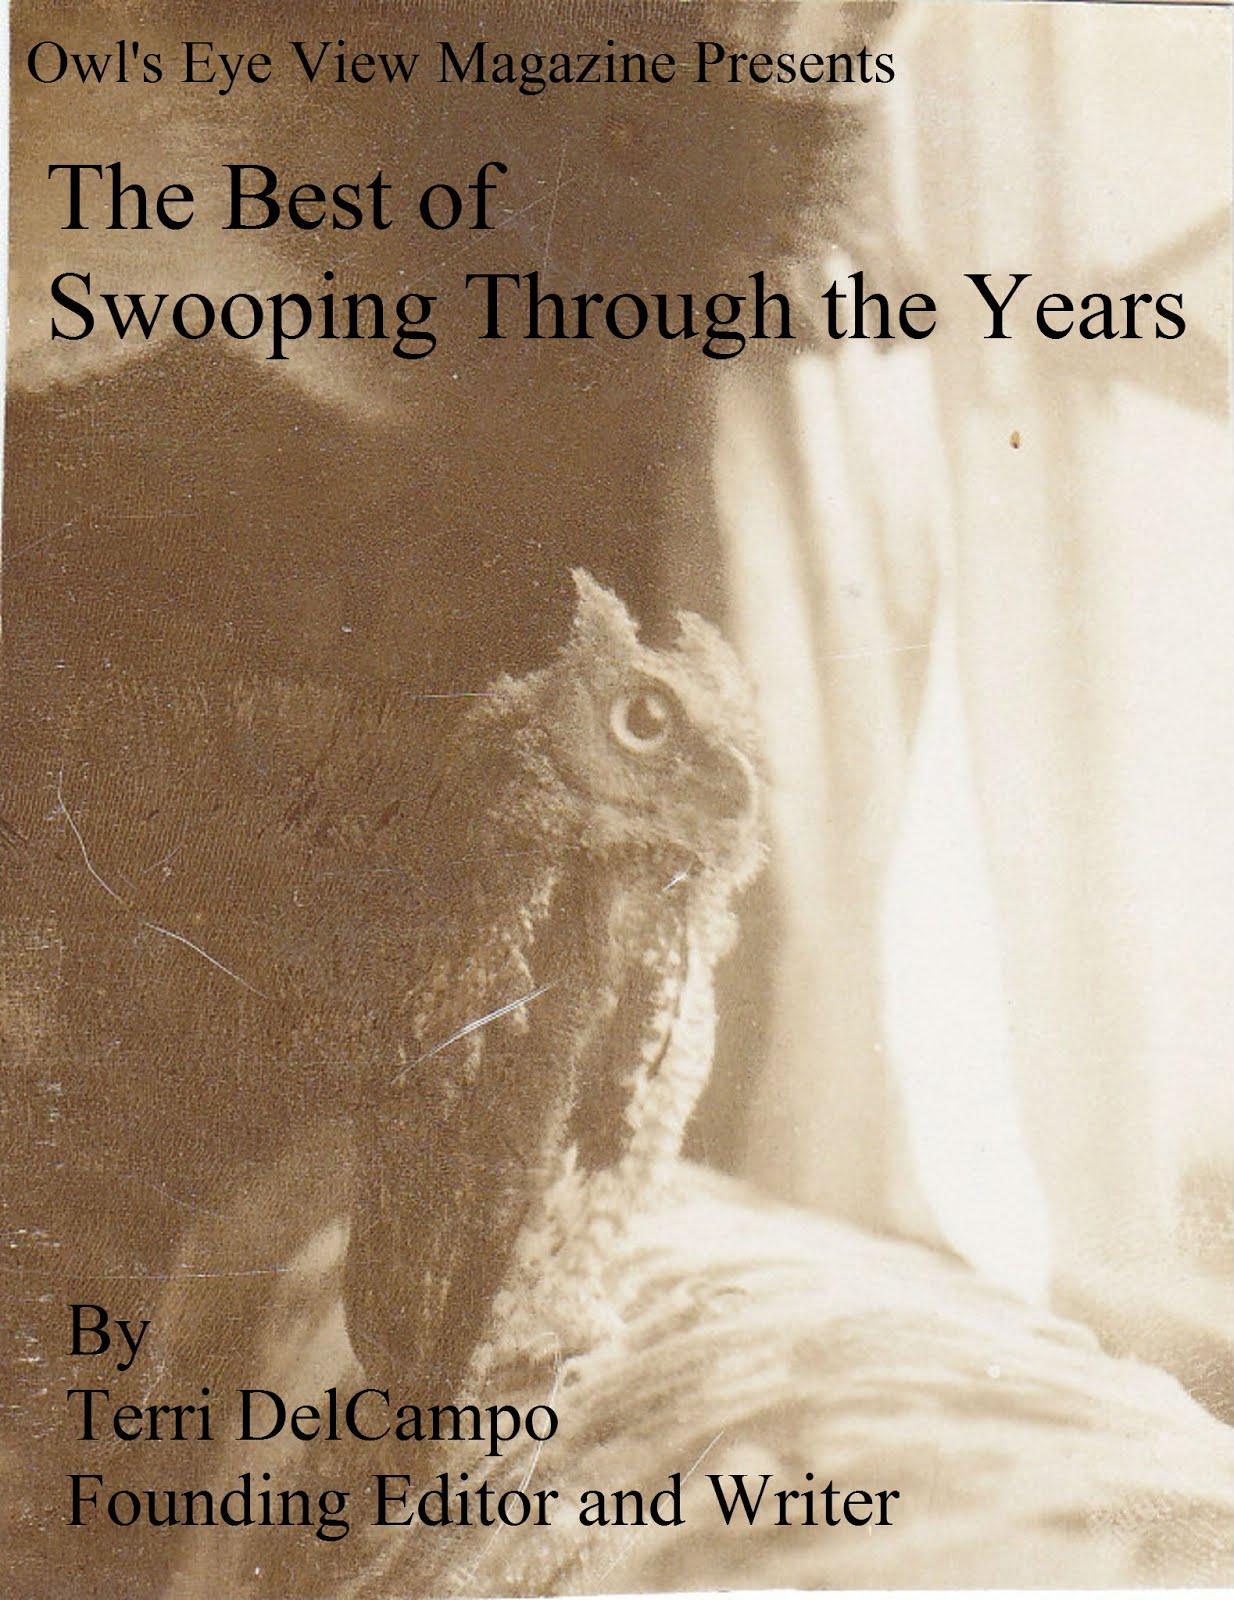 OEV MAGAZINE PRESENTS THE BEST OF SWOOPING THROUGH THE YEARS